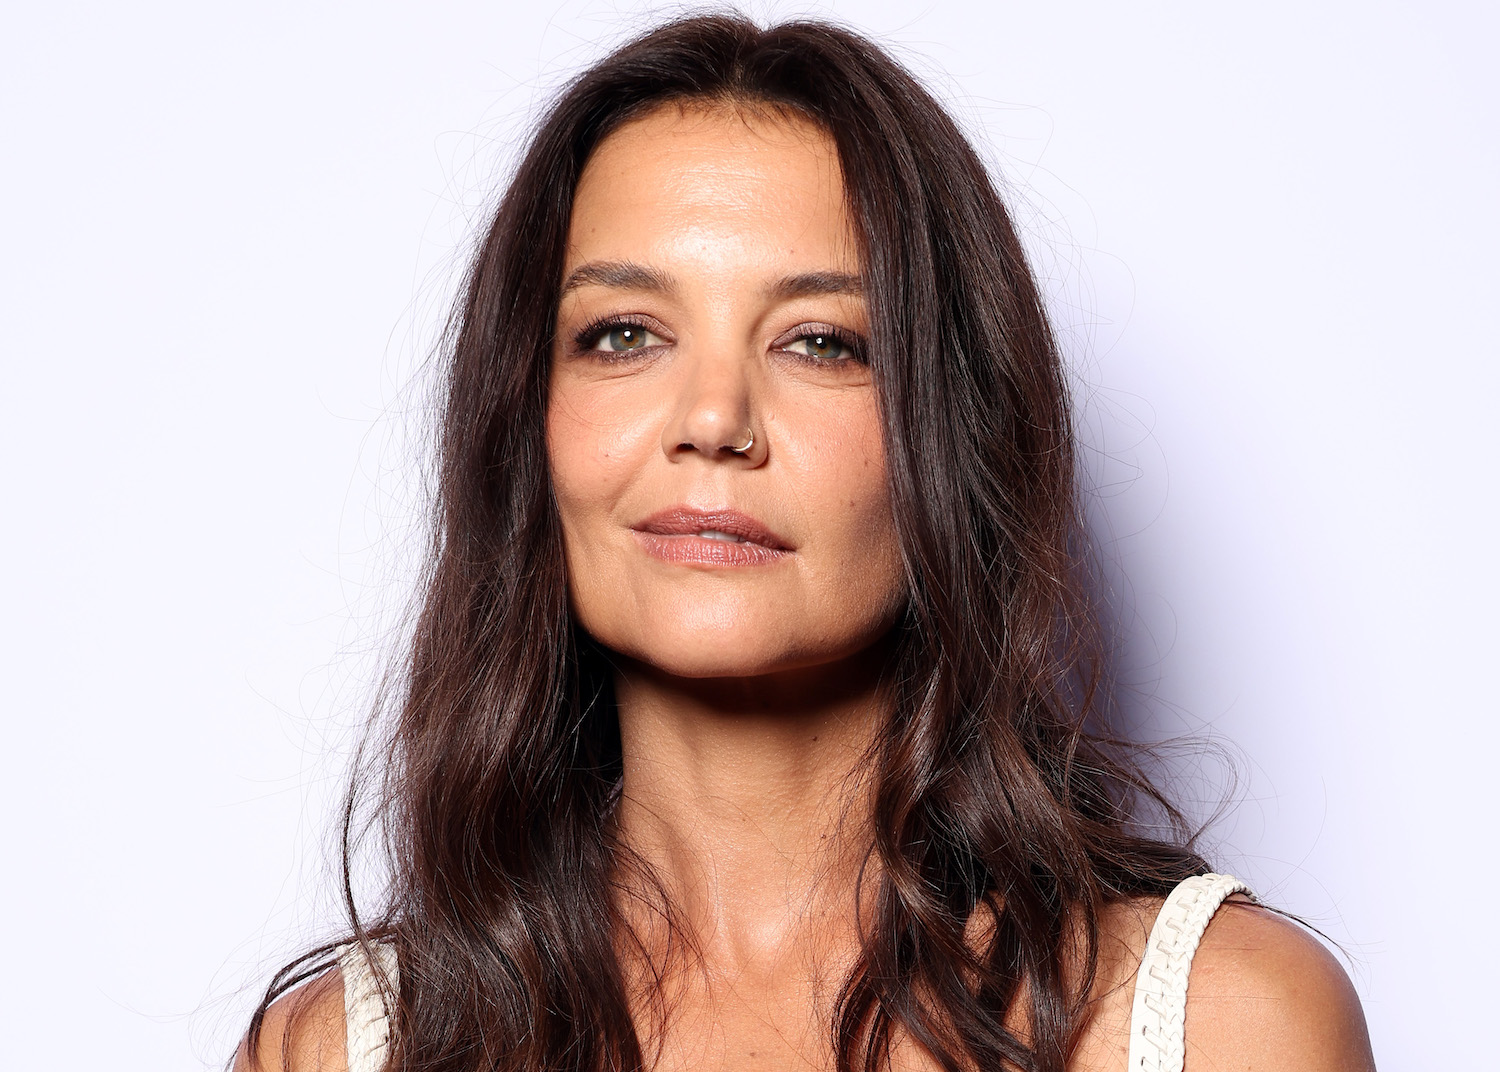 PARIS, FRANCE - SEPTEMBER 29: (EDITORIAL USE ONLY - For Non-Editorial use please seek approval from Fashion House) Katie Holmes attends the Chloe Womenswear Spring/Summer 2023 show as part of Paris Fashion Week  on September 29, 2022 in Paris, France. (Photo by Pascal Le Segretain/Getty Images)